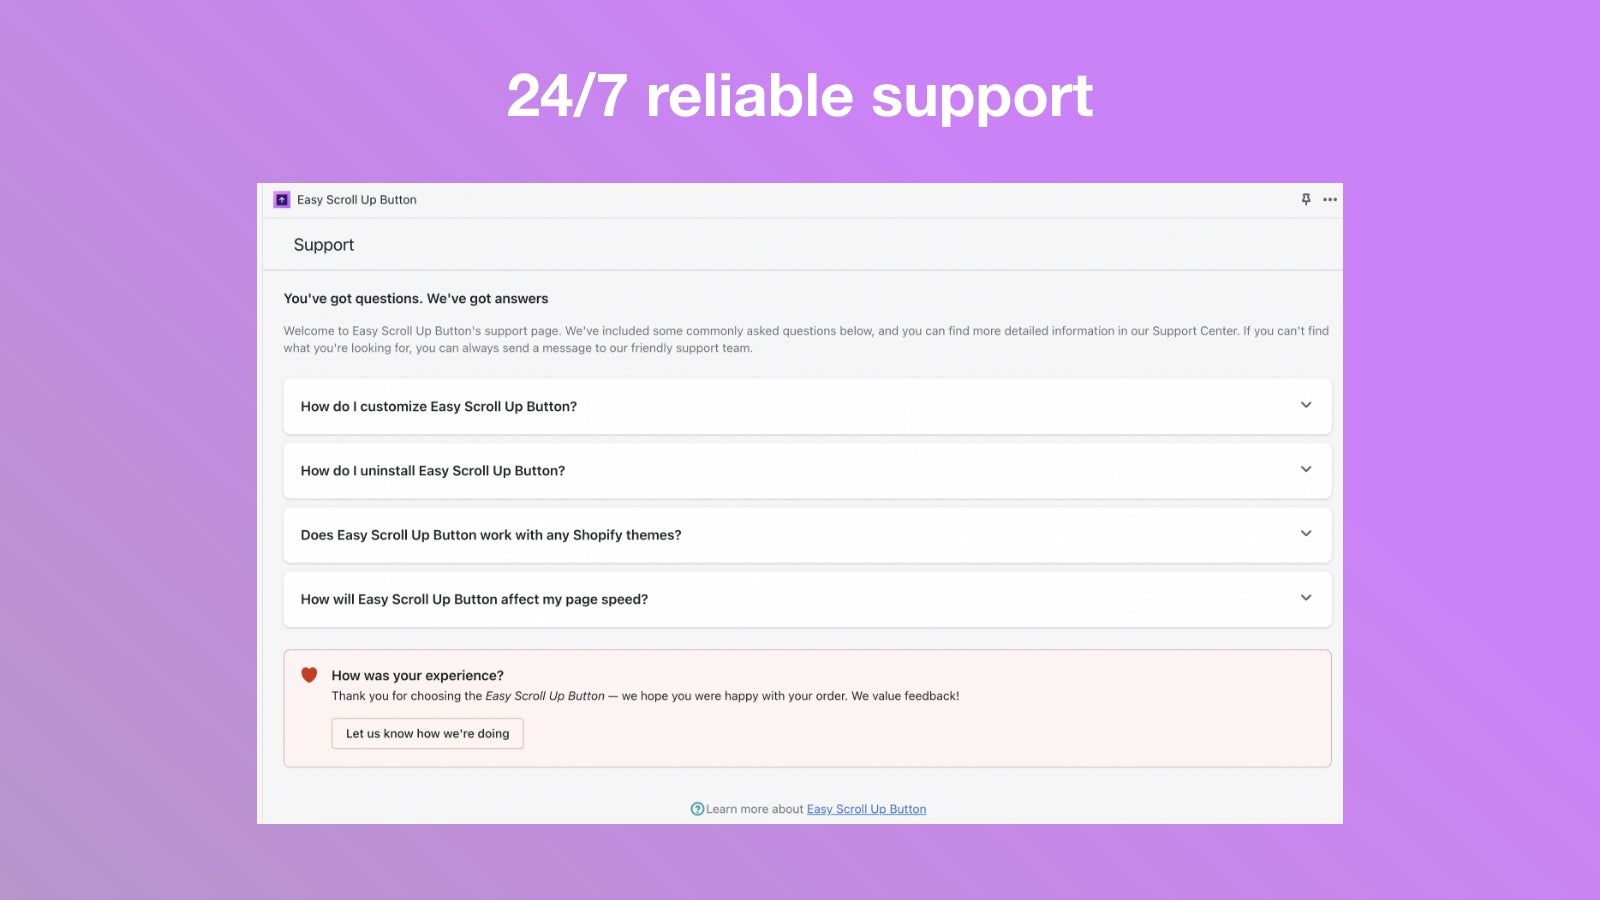 easy scroll up button - reliable support 24/7